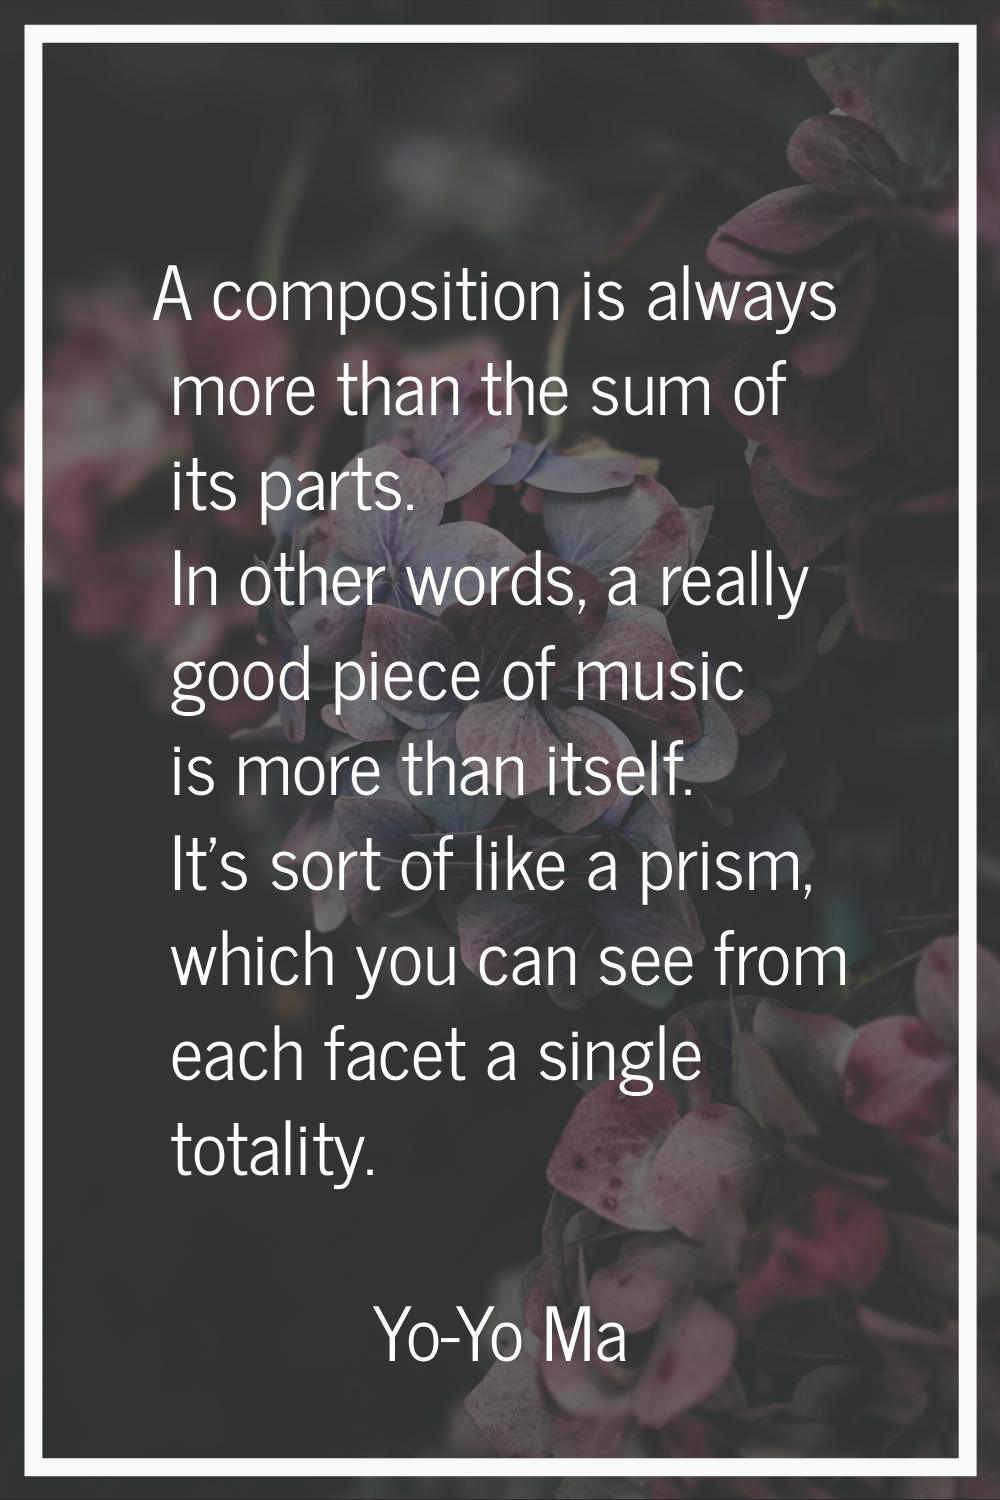 A composition is always more than the sum of its parts. In other words, a really good piece of musi